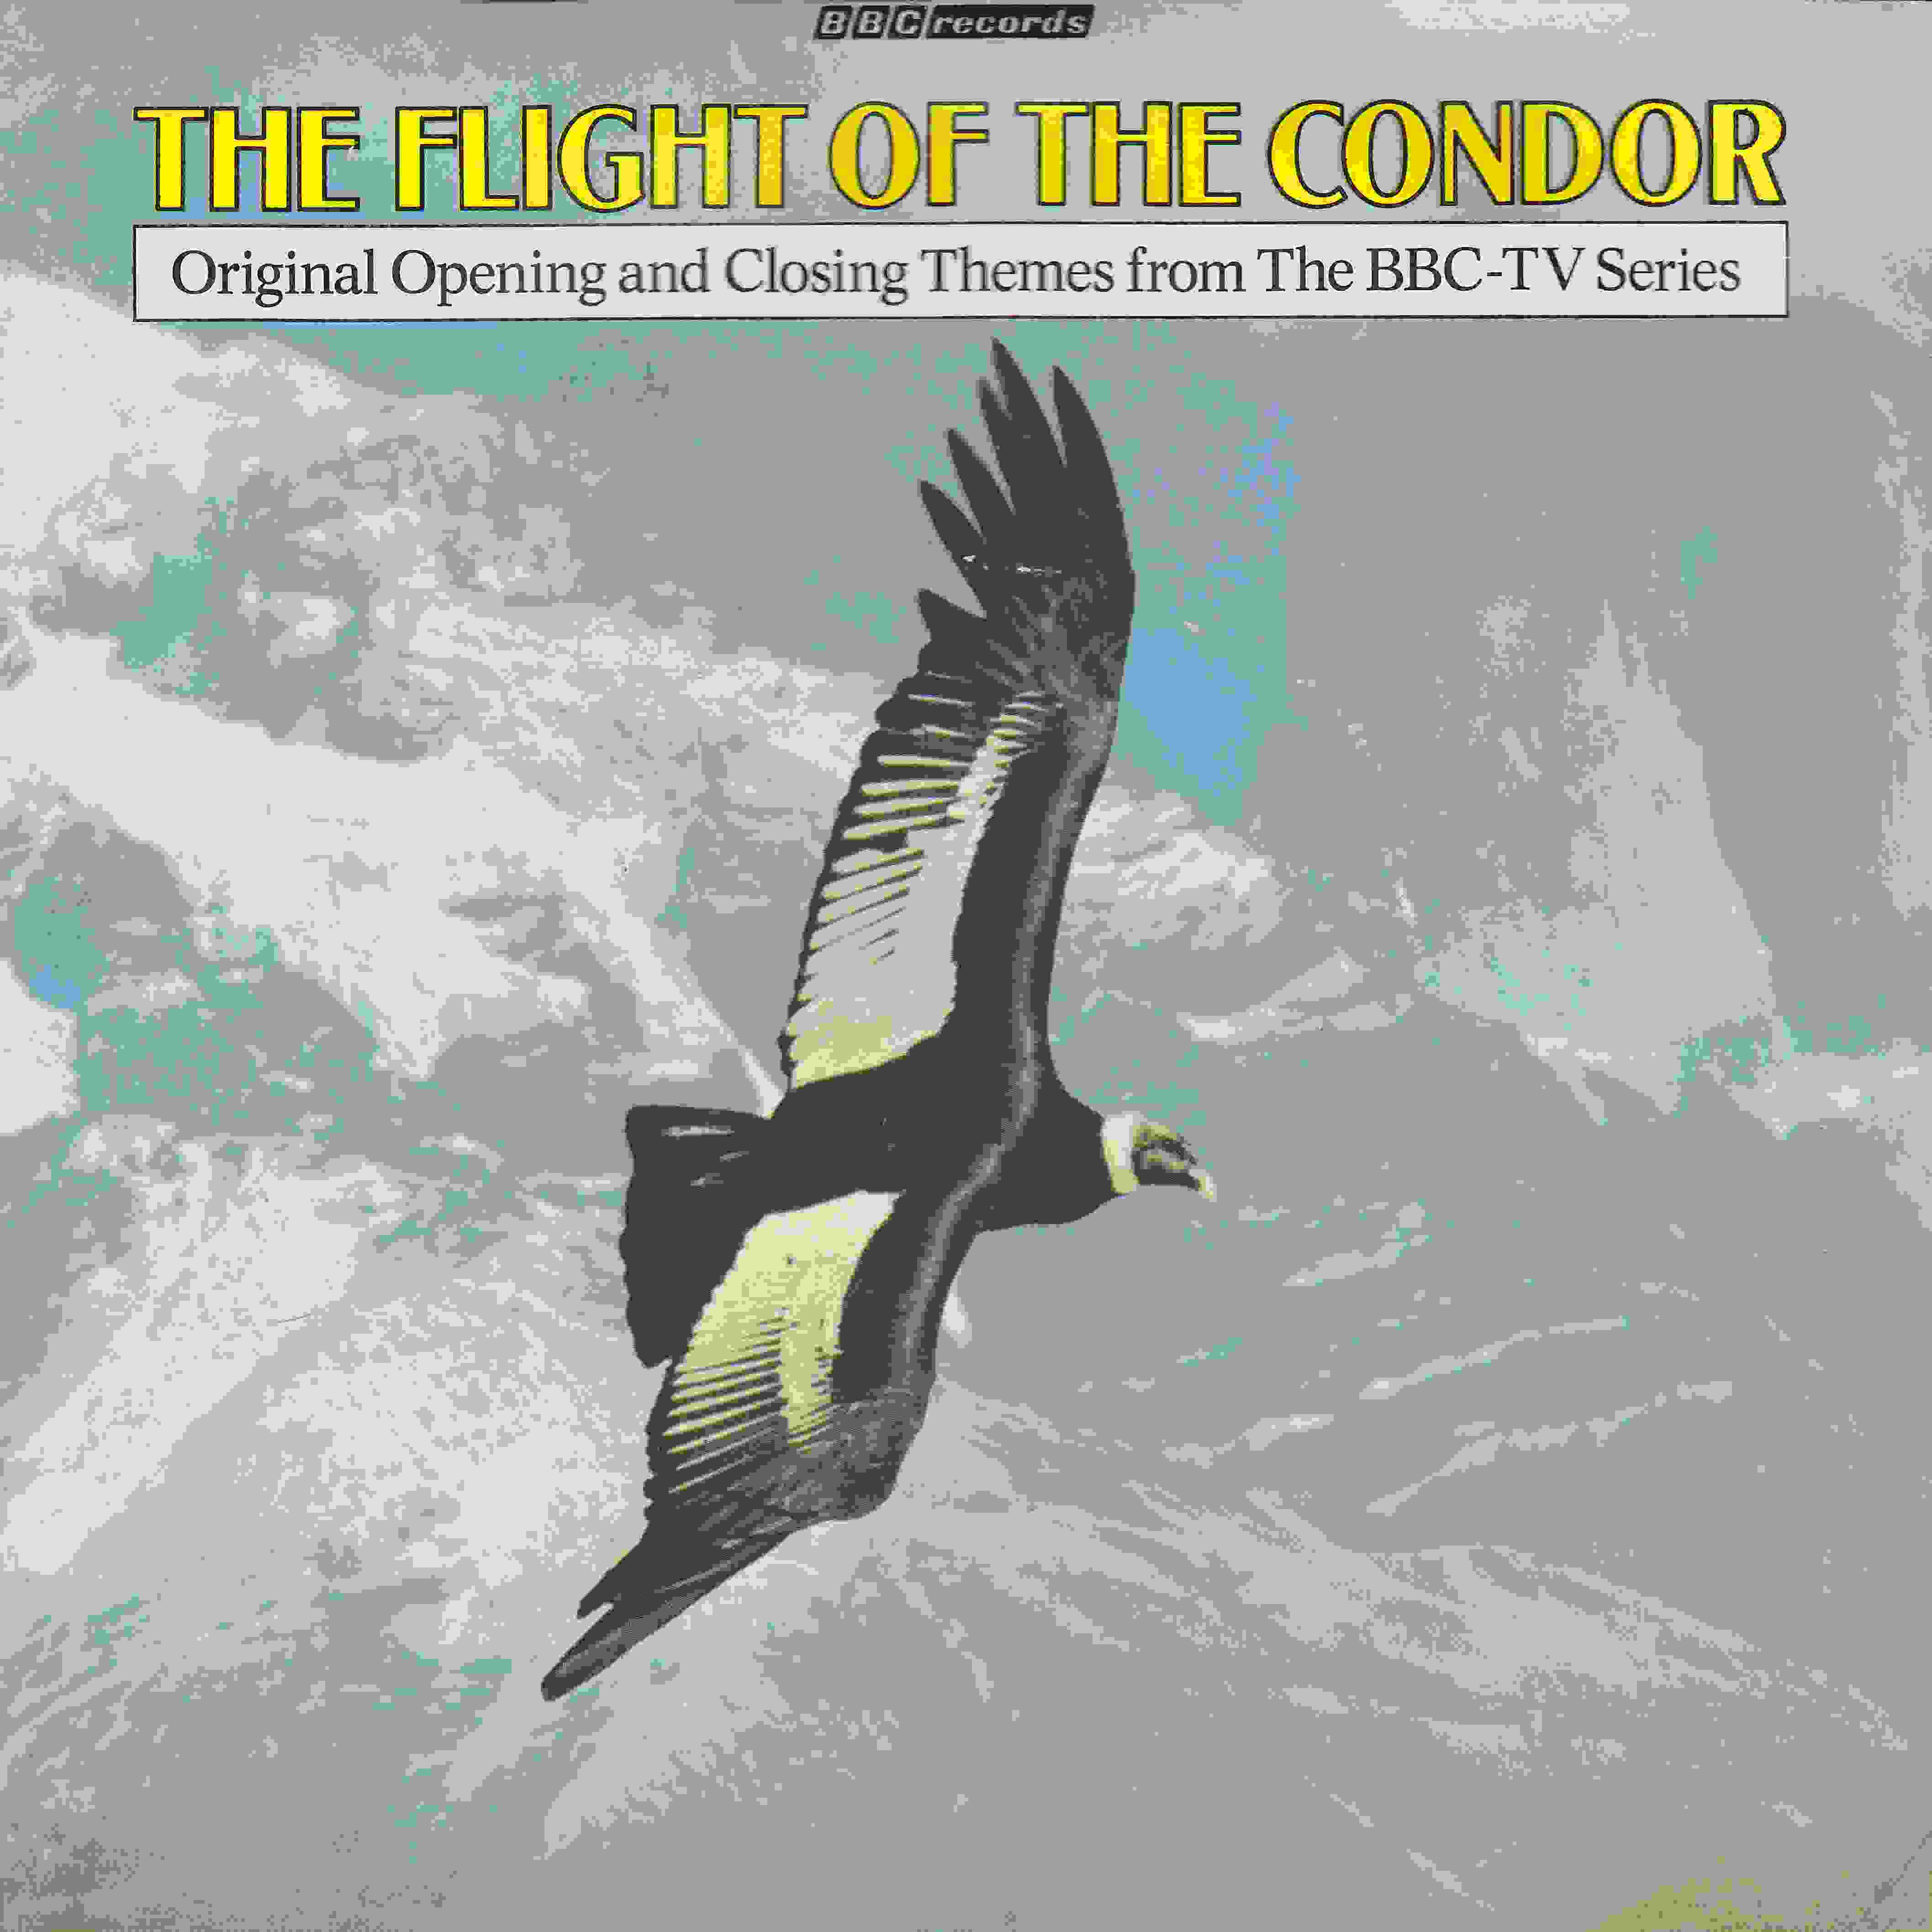 Picture of RESL 125 Floreo de llamas (Flight of the condor) by artist Guamary / Inti Illimani from the BBC records and Tapes library